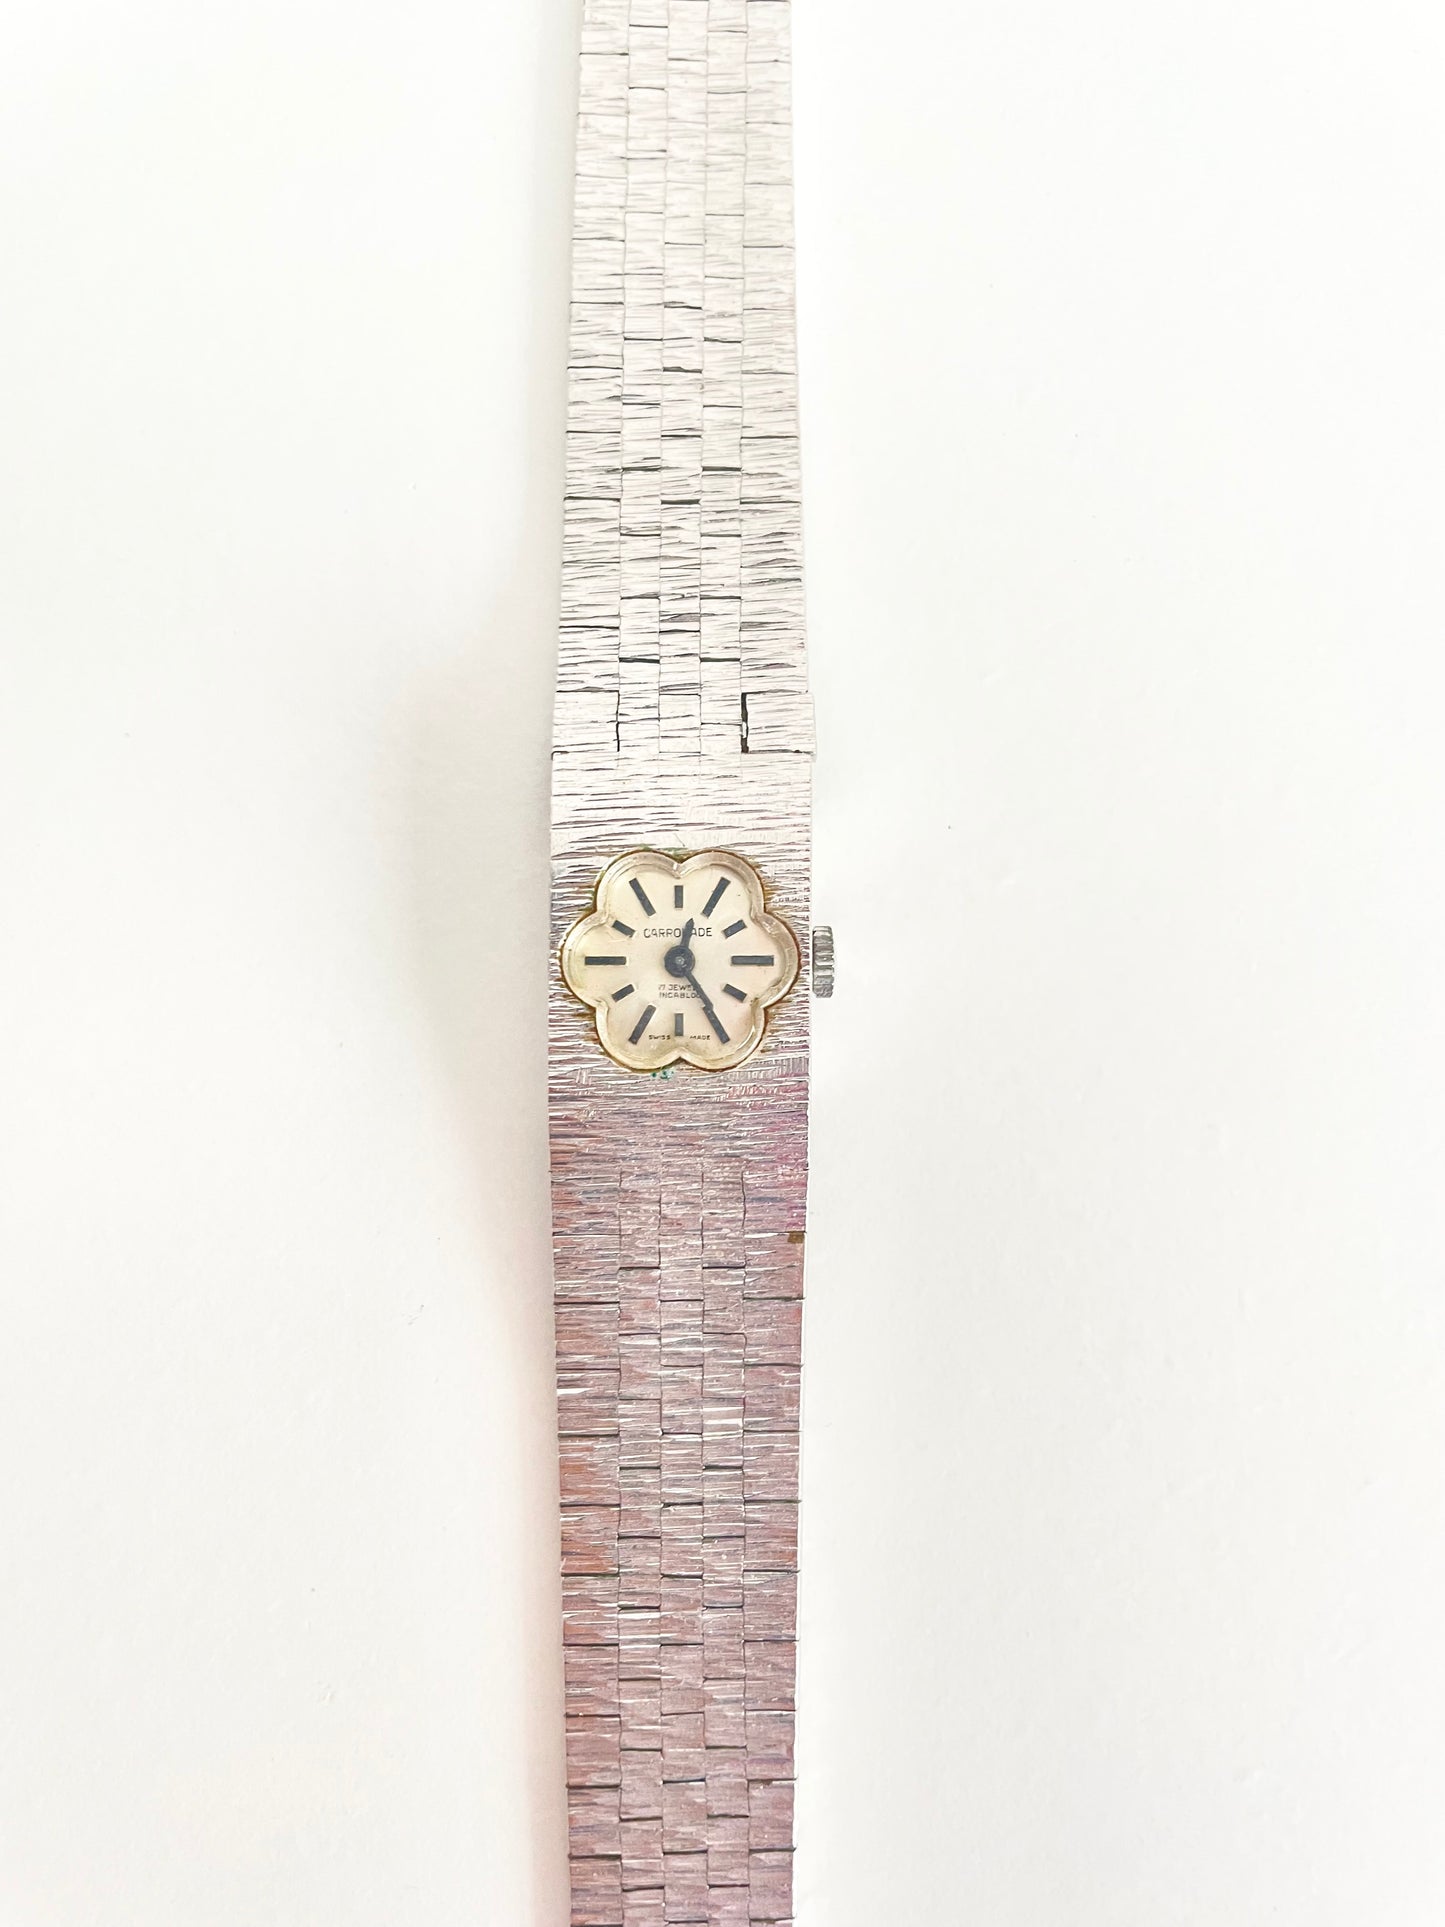 The Buttercup Watch